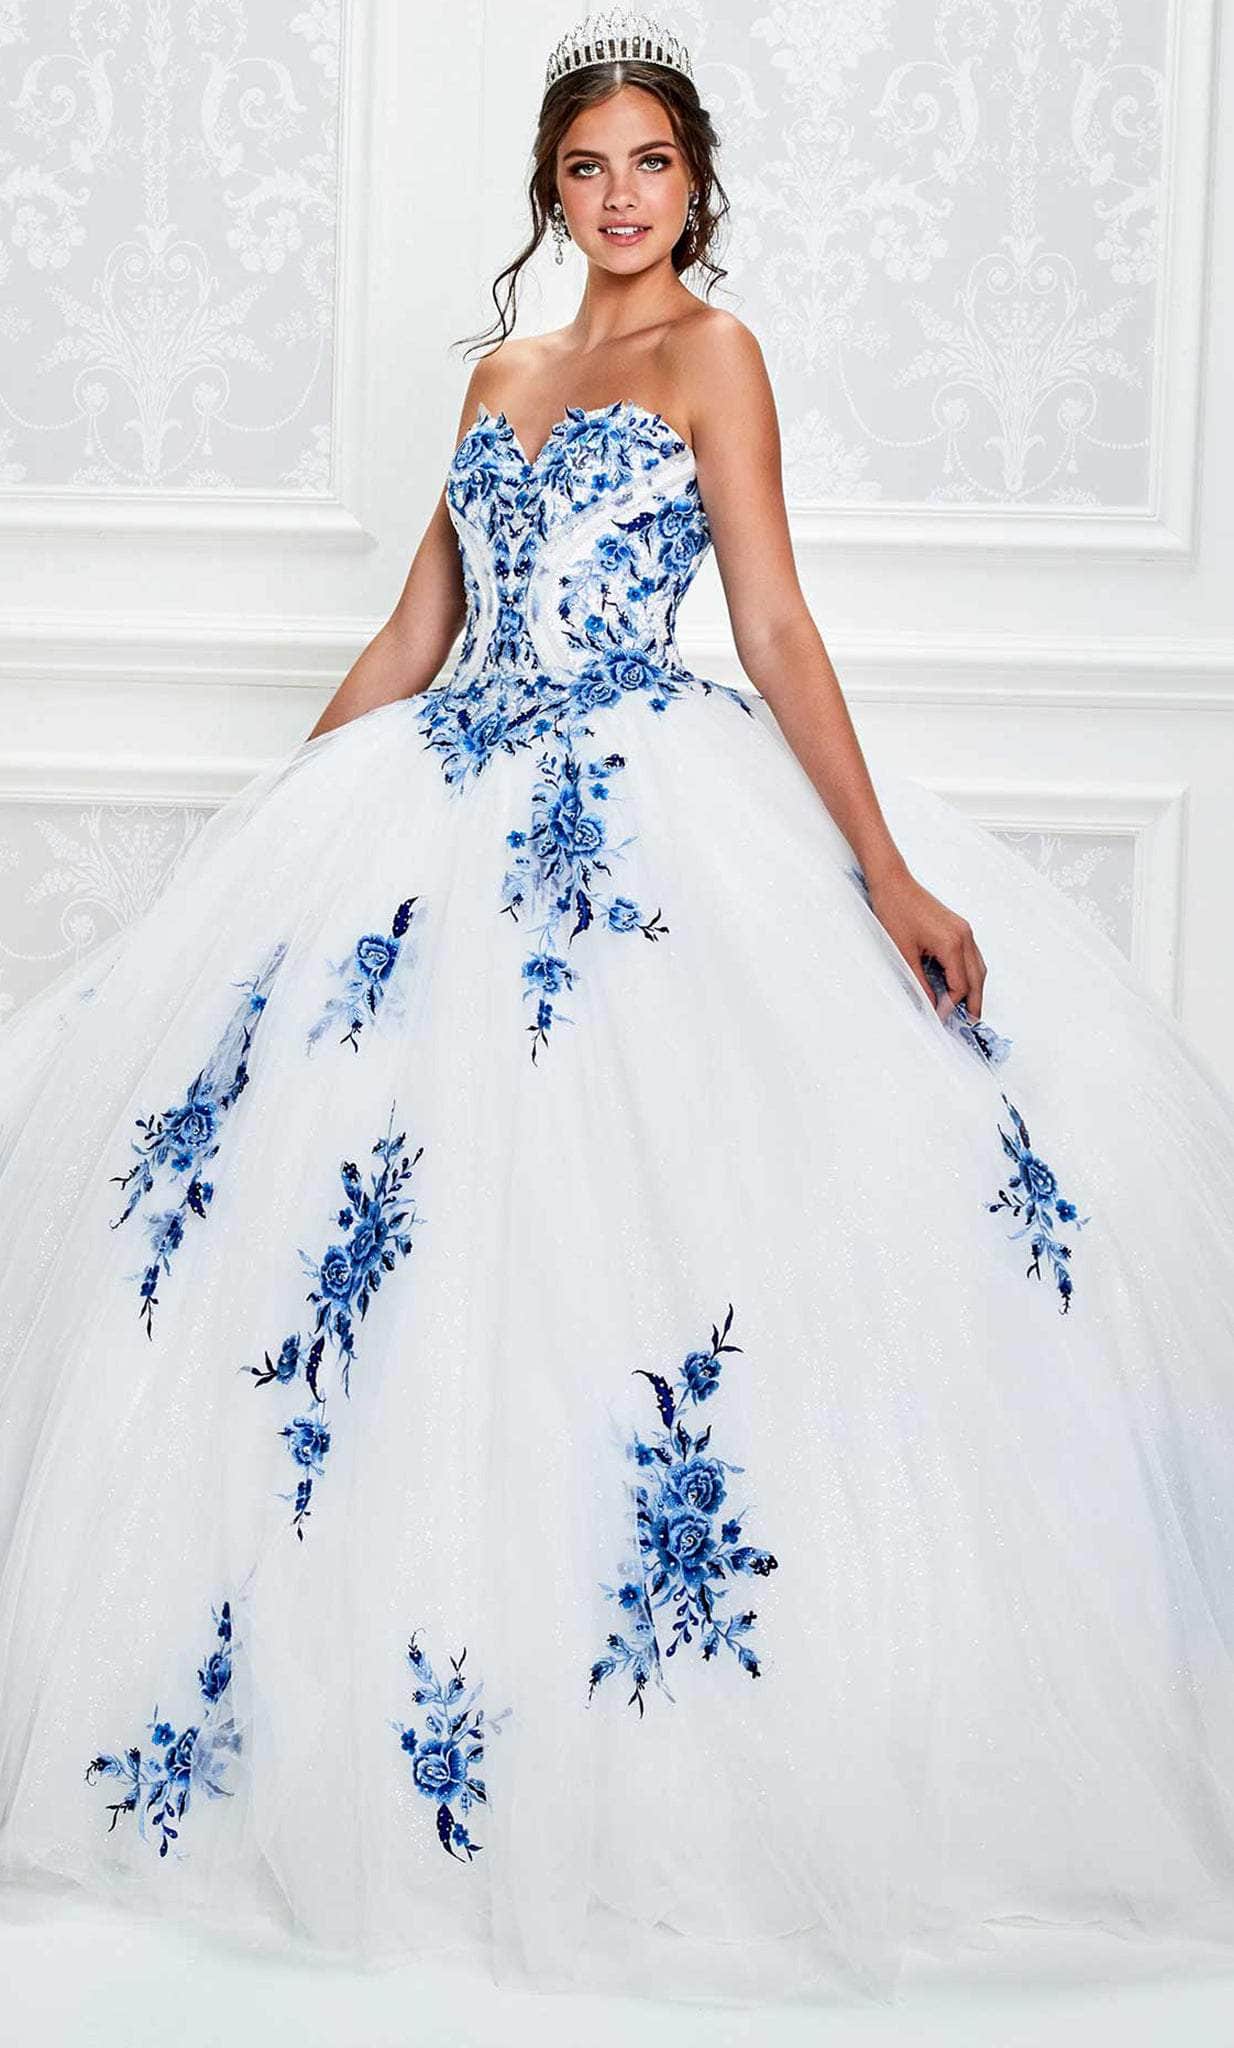 Image of Princesa by Ariana Vara PR11928 - Strapless Floral Lace Ballgown